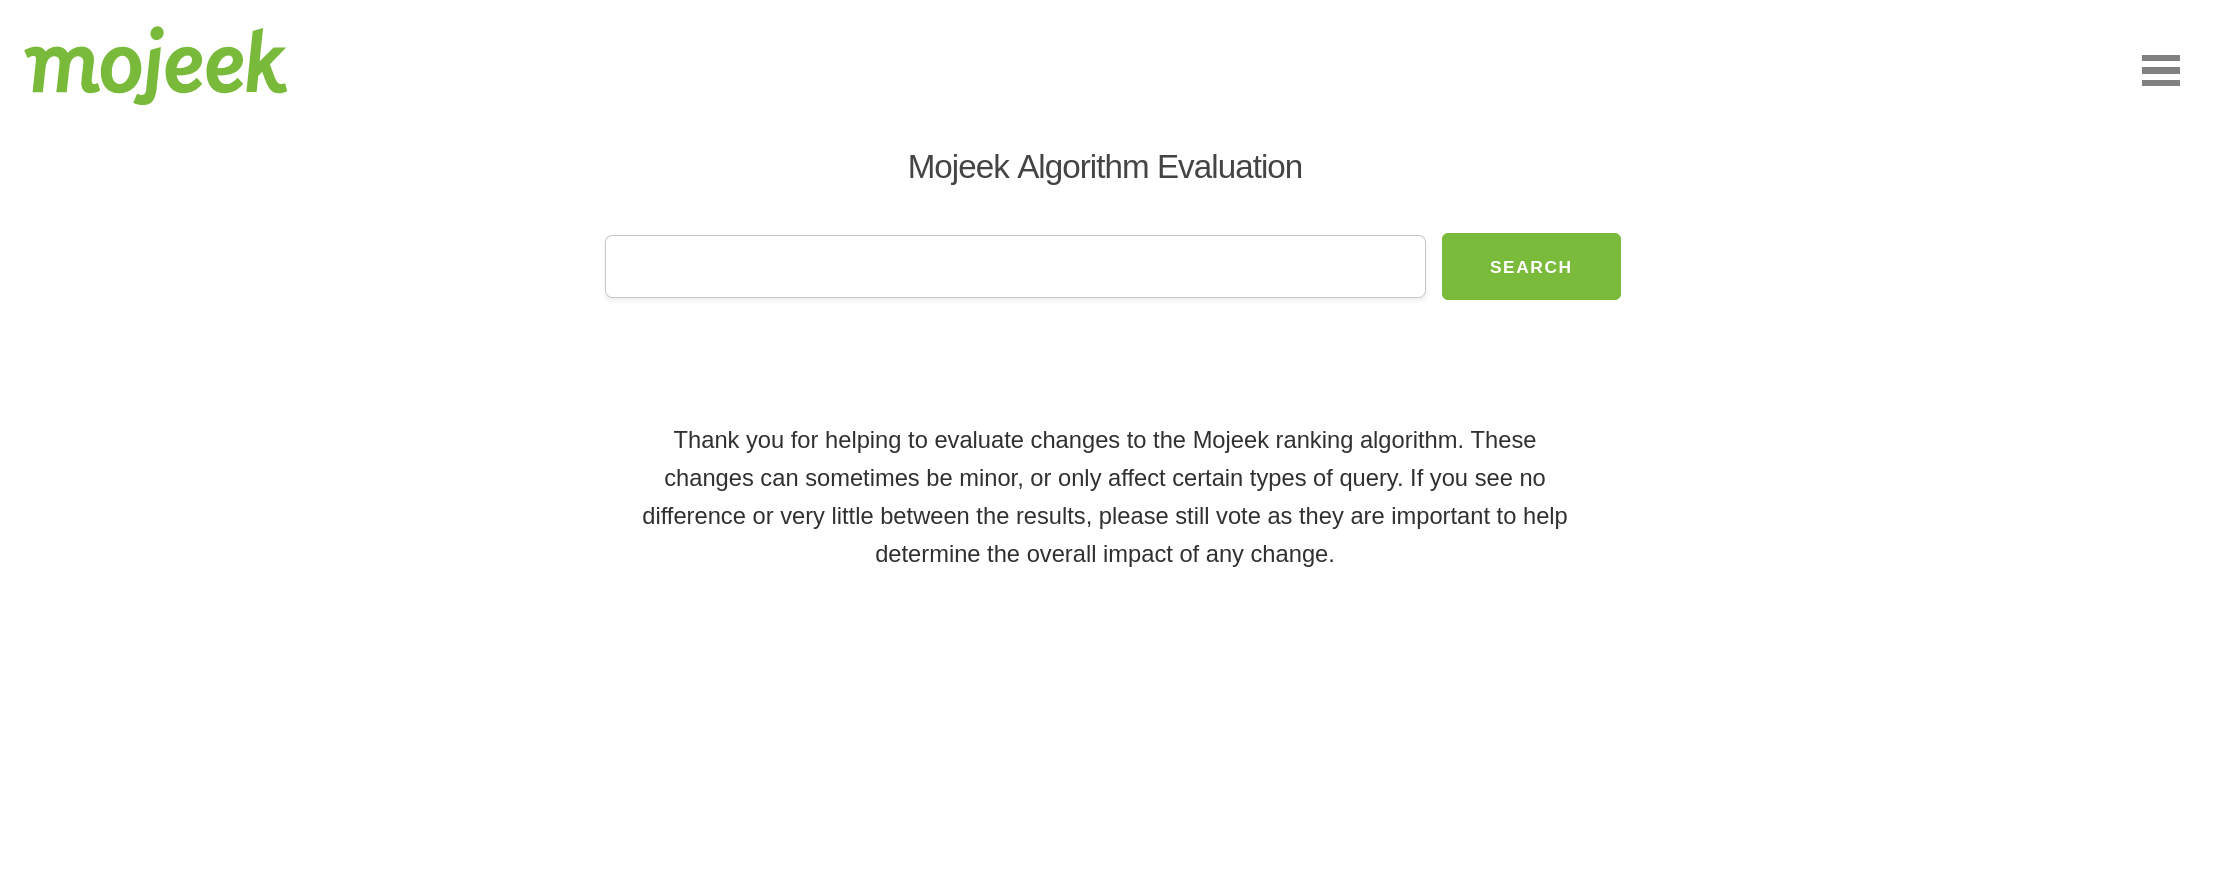 an image of Mojeek's Algorithm Evaluation page, a searchbox and button sit below the title "Mojeek Algorithm Evaluation;" under this is a paragraph of text explaining what it is and how it works